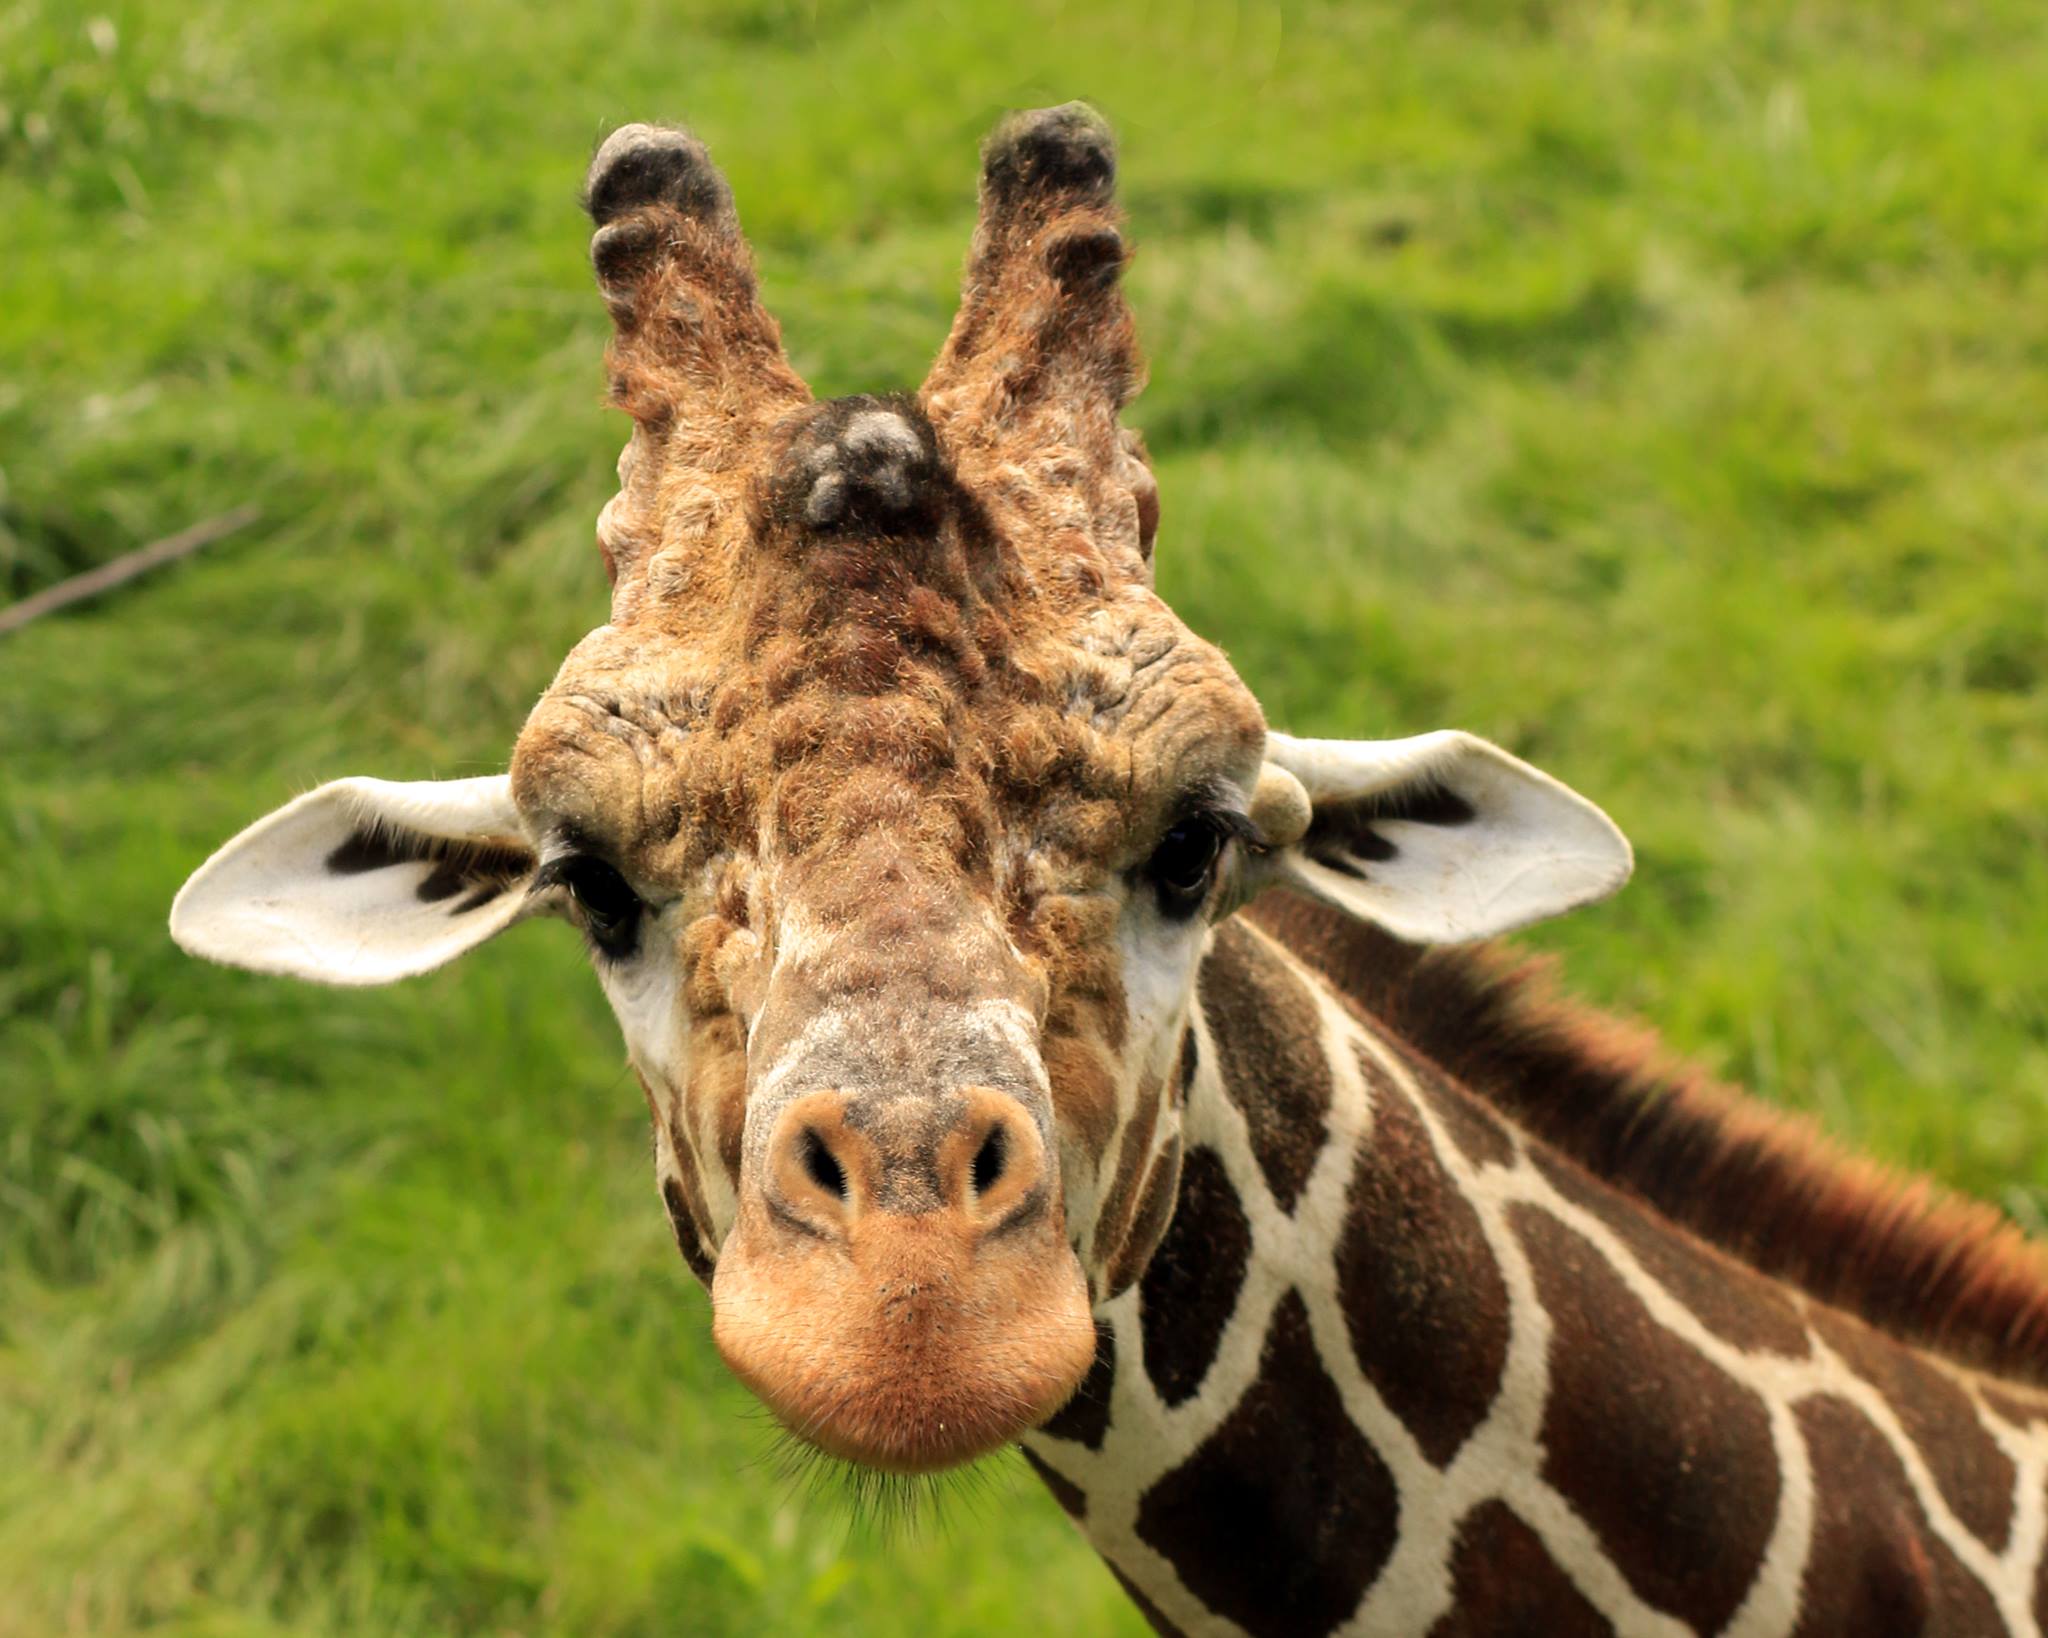 Click here to watch a video about the Giraffes at Peoria Zoo!